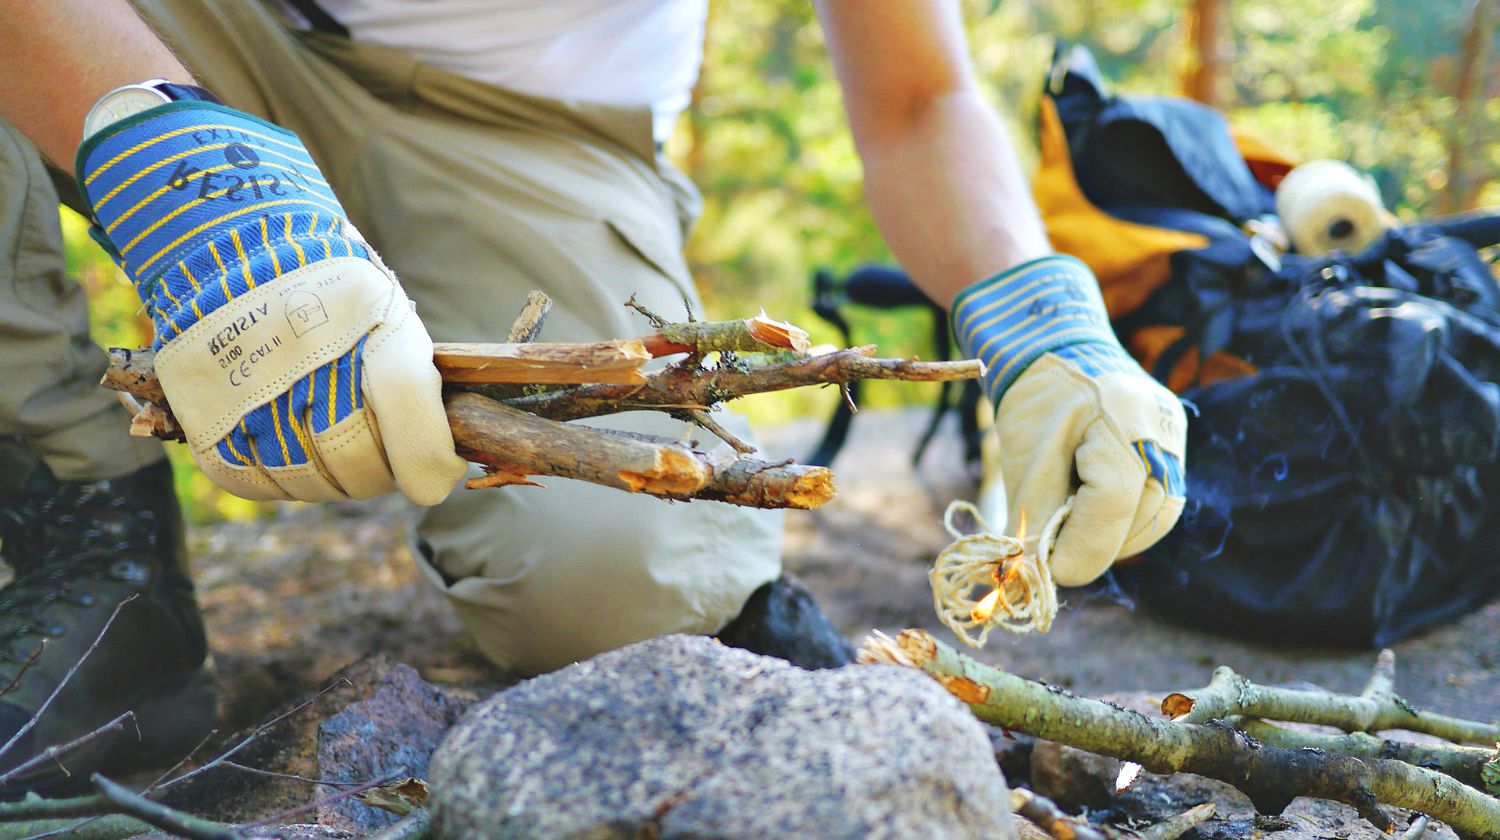 Feature | Campfire camping outddoor | Self-Sufficiency Skills Every Prepper Should Learn